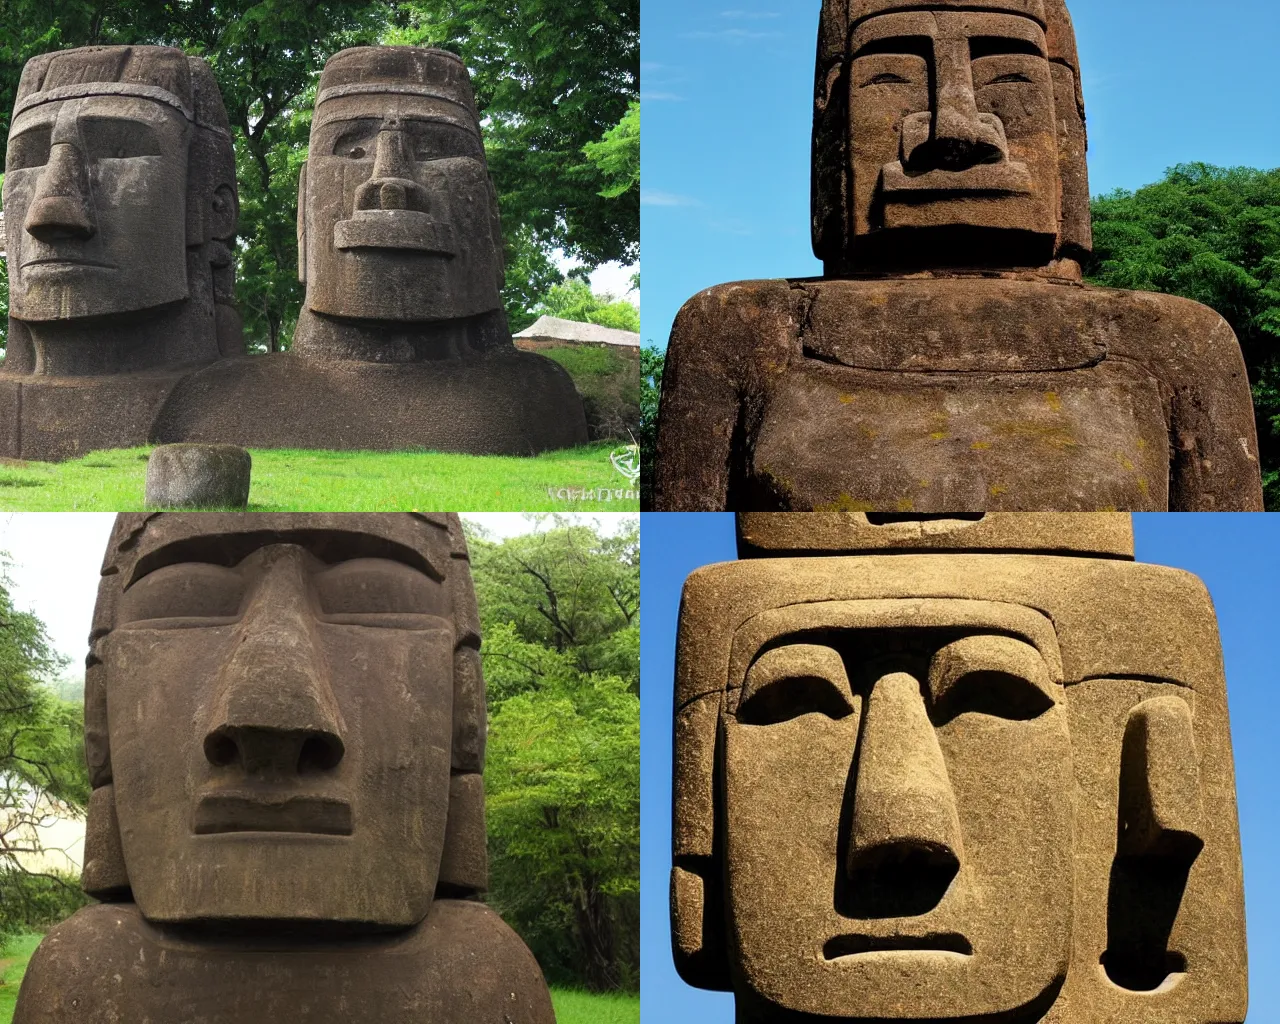 Prompt: A detailed moai statue of Linus Torvalds. Linus Torvalds as a detailed moai statue.